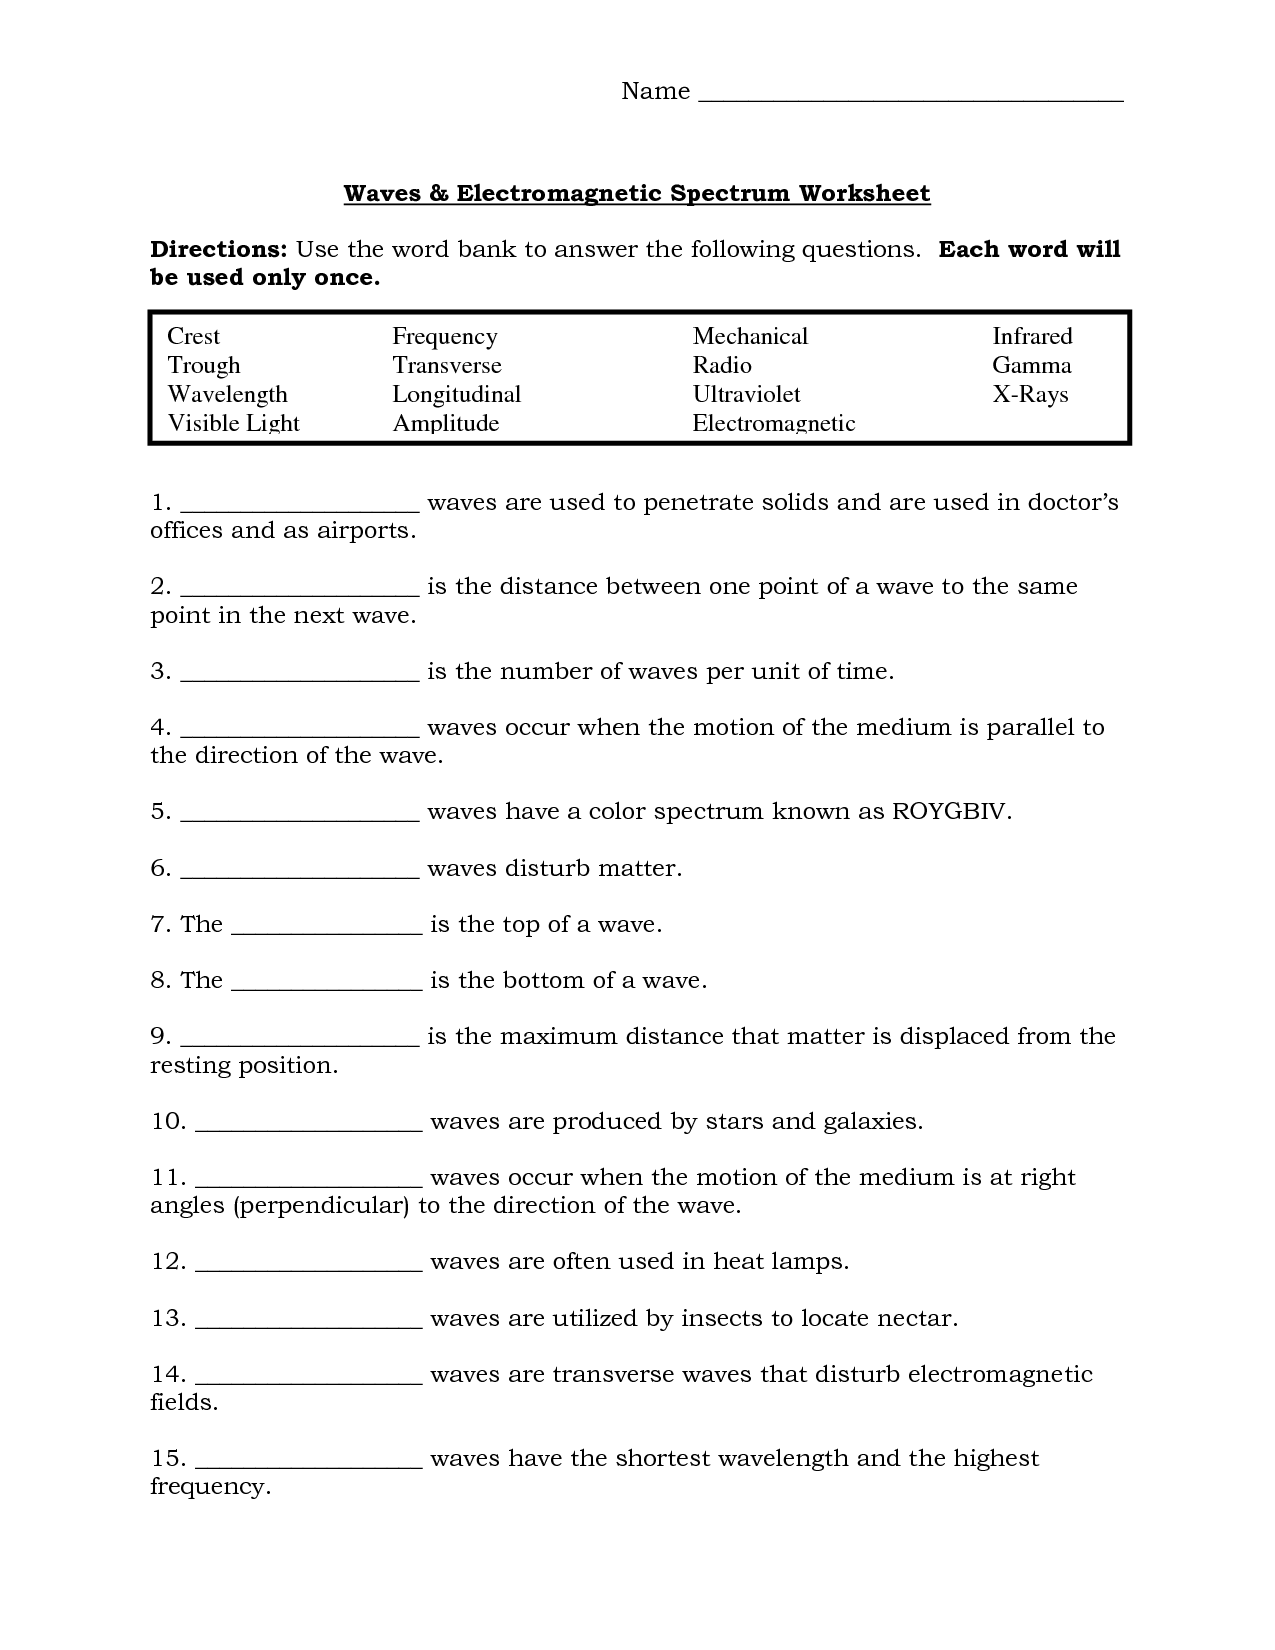 Waves and Electromagnetic Spectrum Worksheet Answers